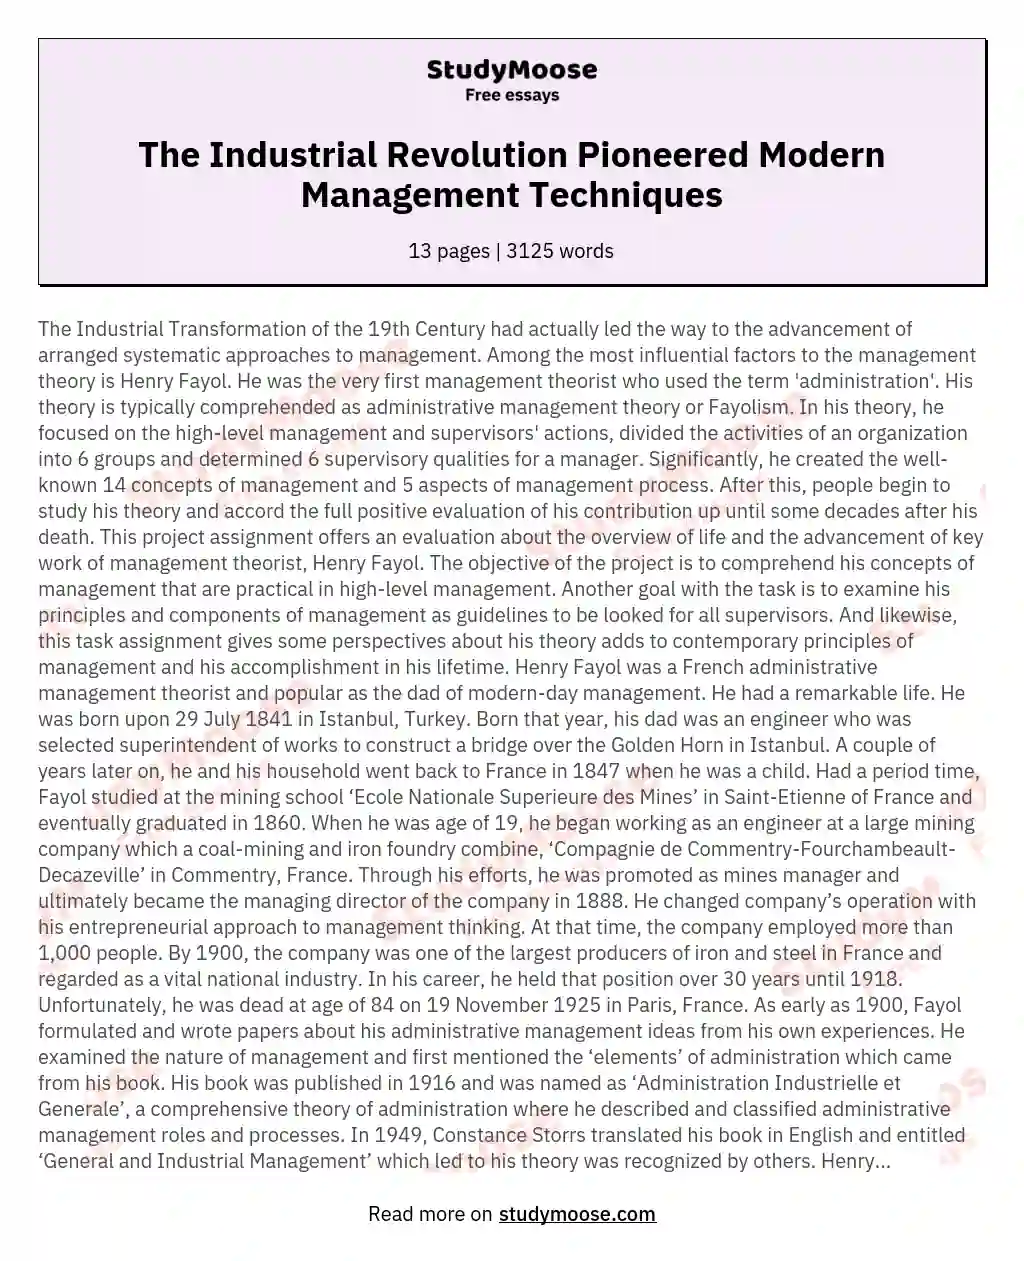 The Industrial Revolution Pioneered Modern Management Techniques ...